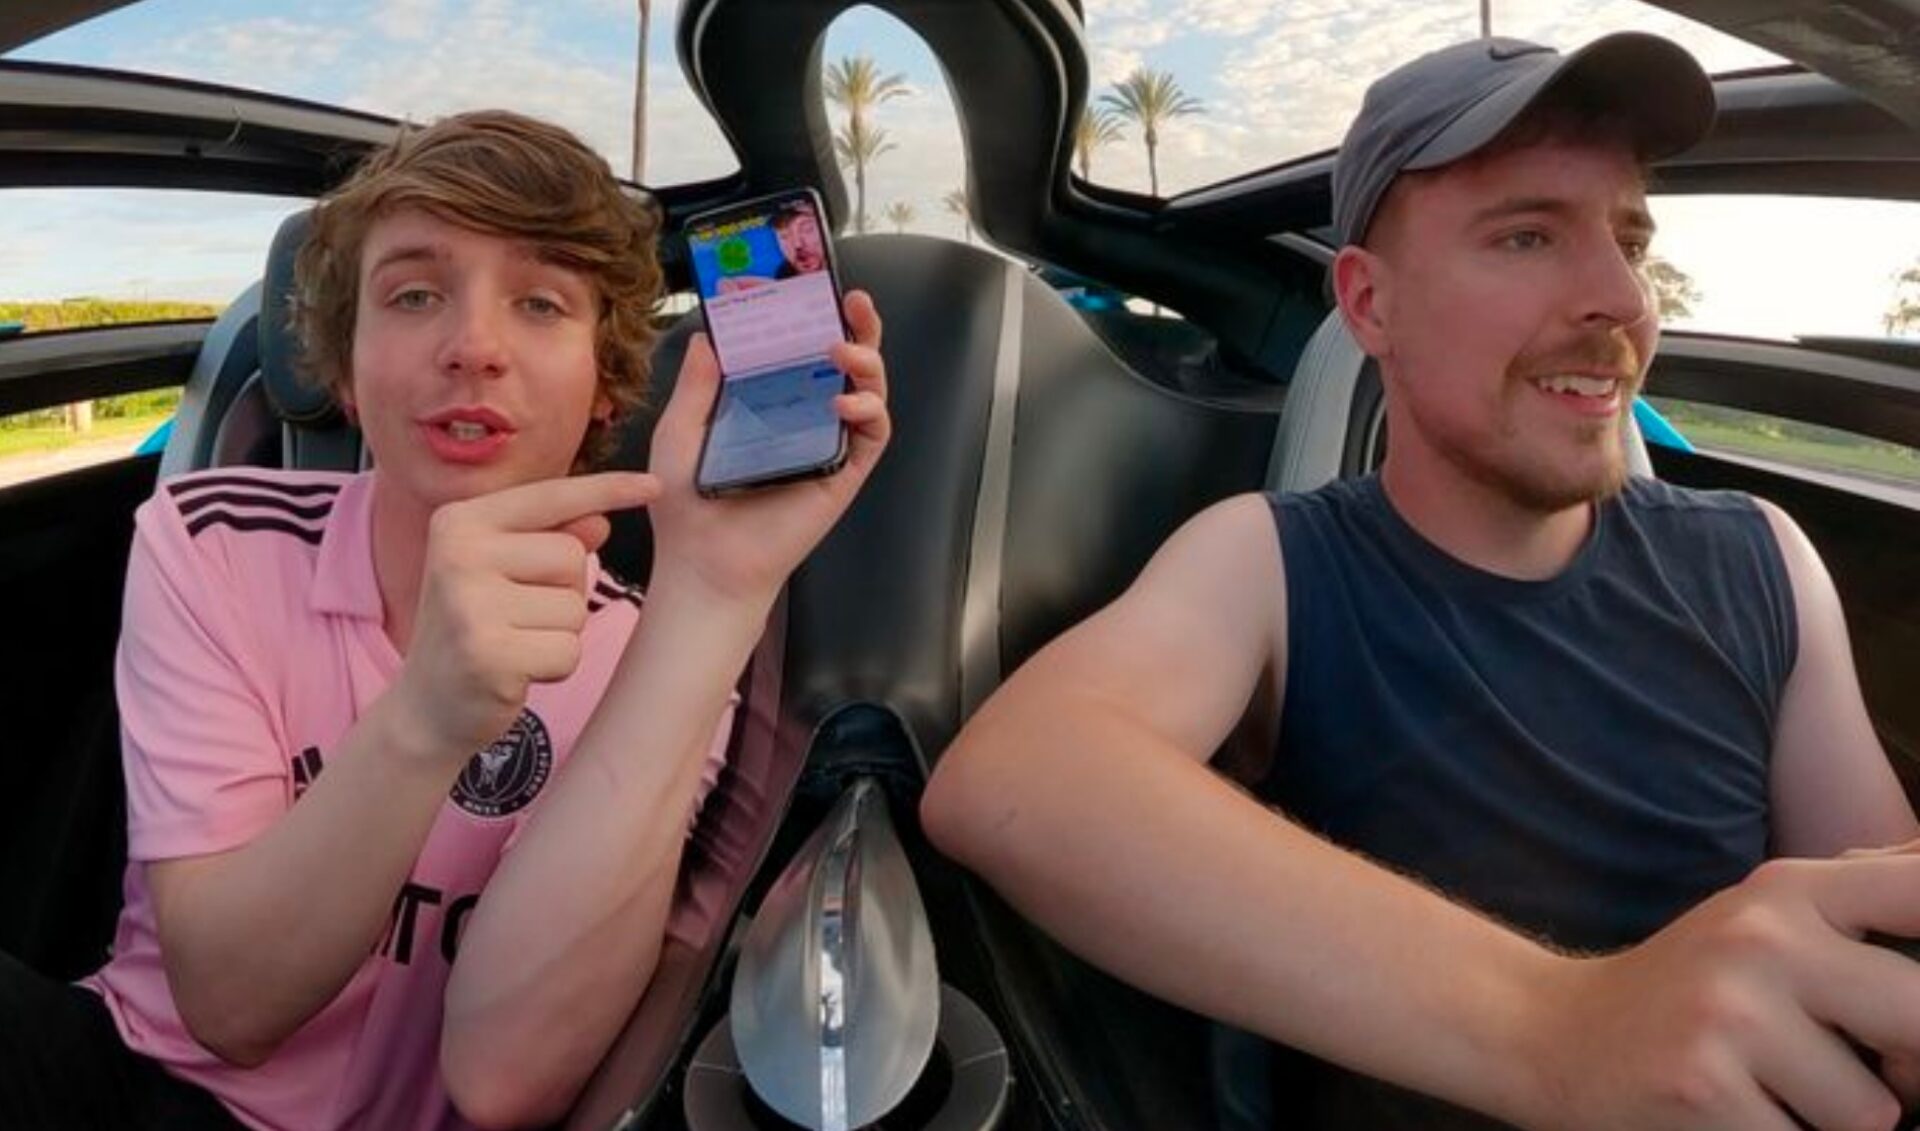 Samsung Galaxy is now the official vlog camera of MrBeast